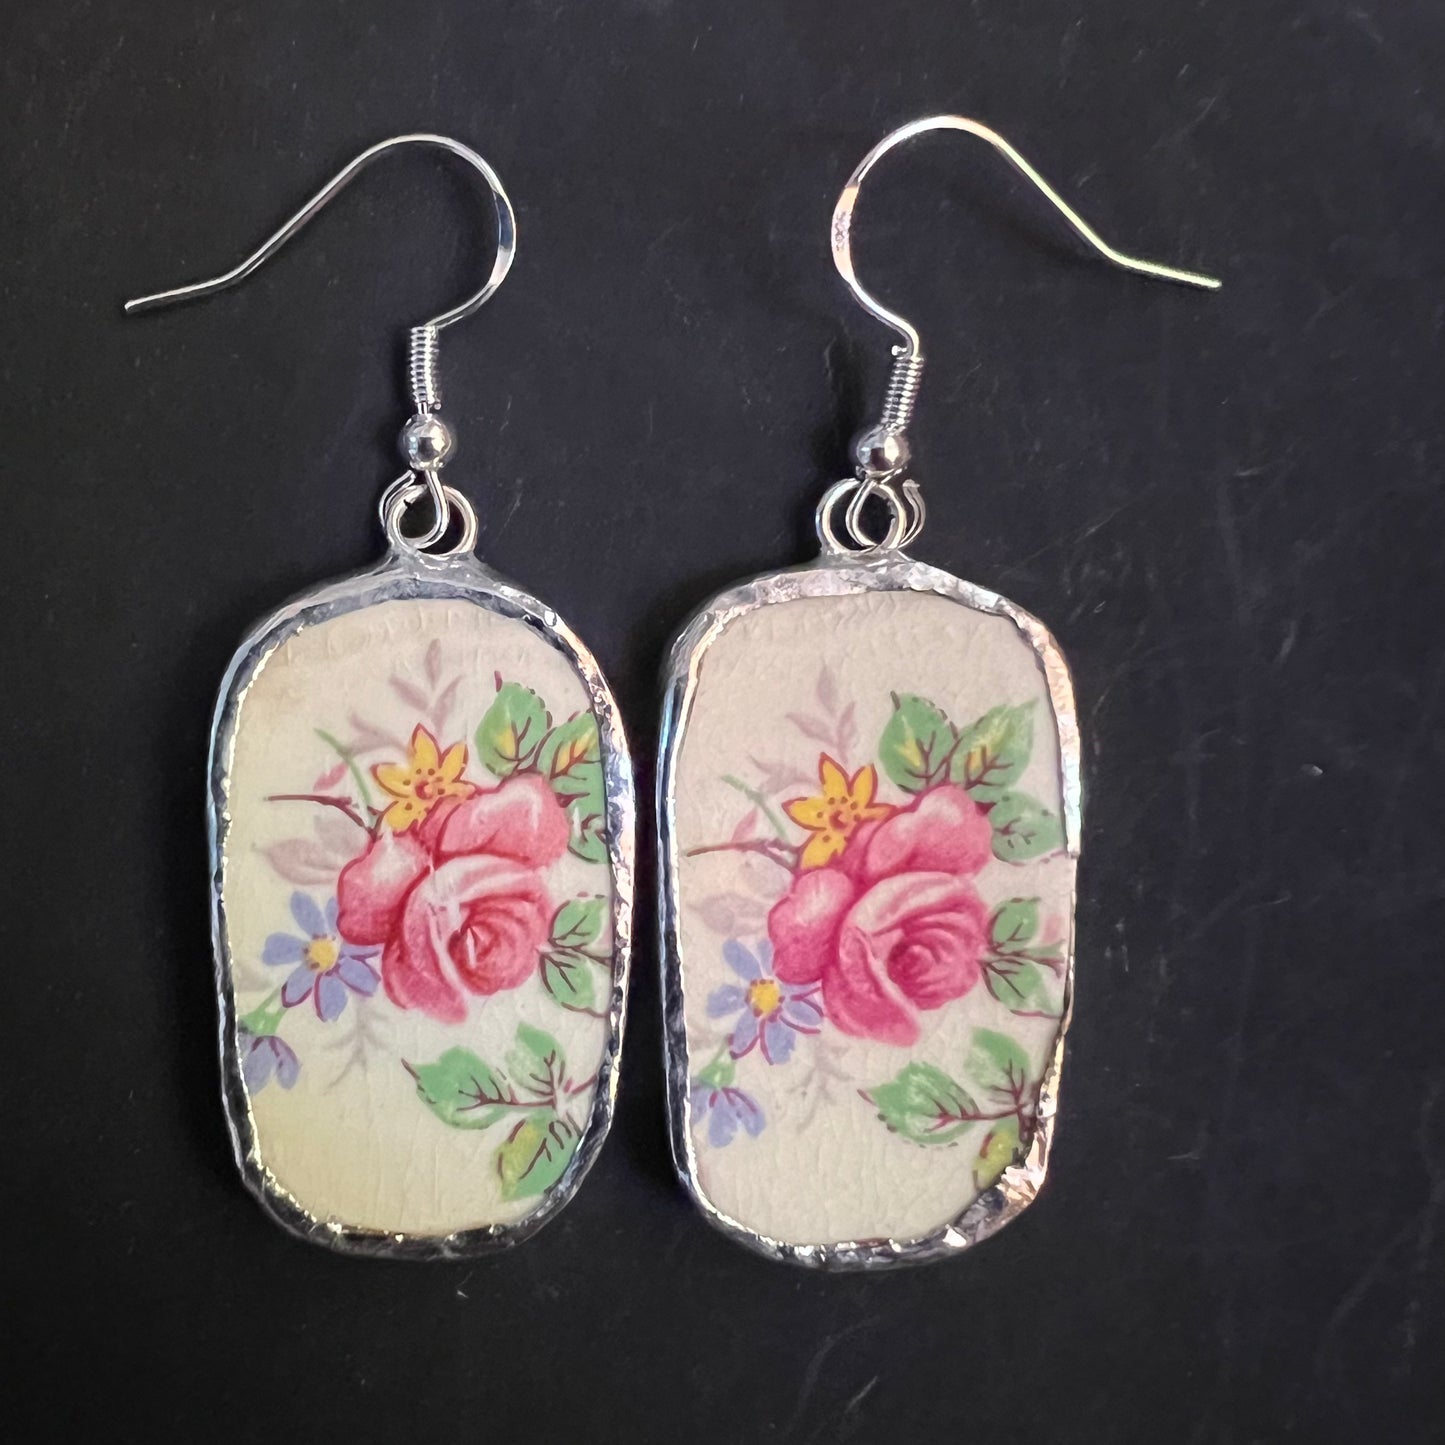 Vintage China Earrings Old Fashioned Blooms